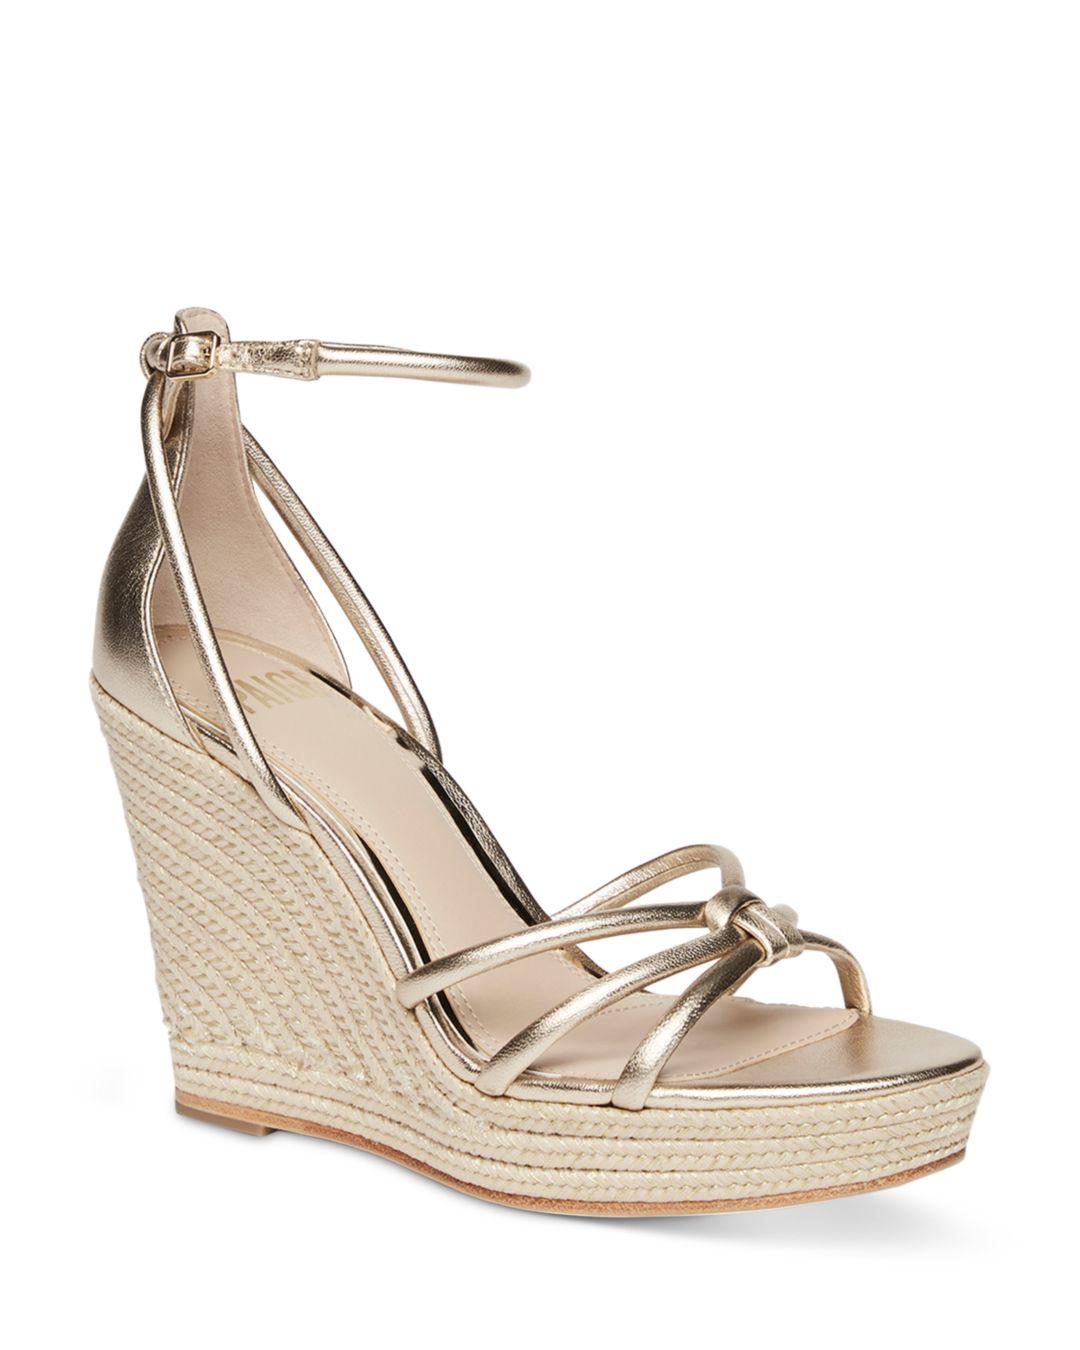 PAIGE Tami Ankle Strap Espadrille Wedge Sandals in Natural | Lyst